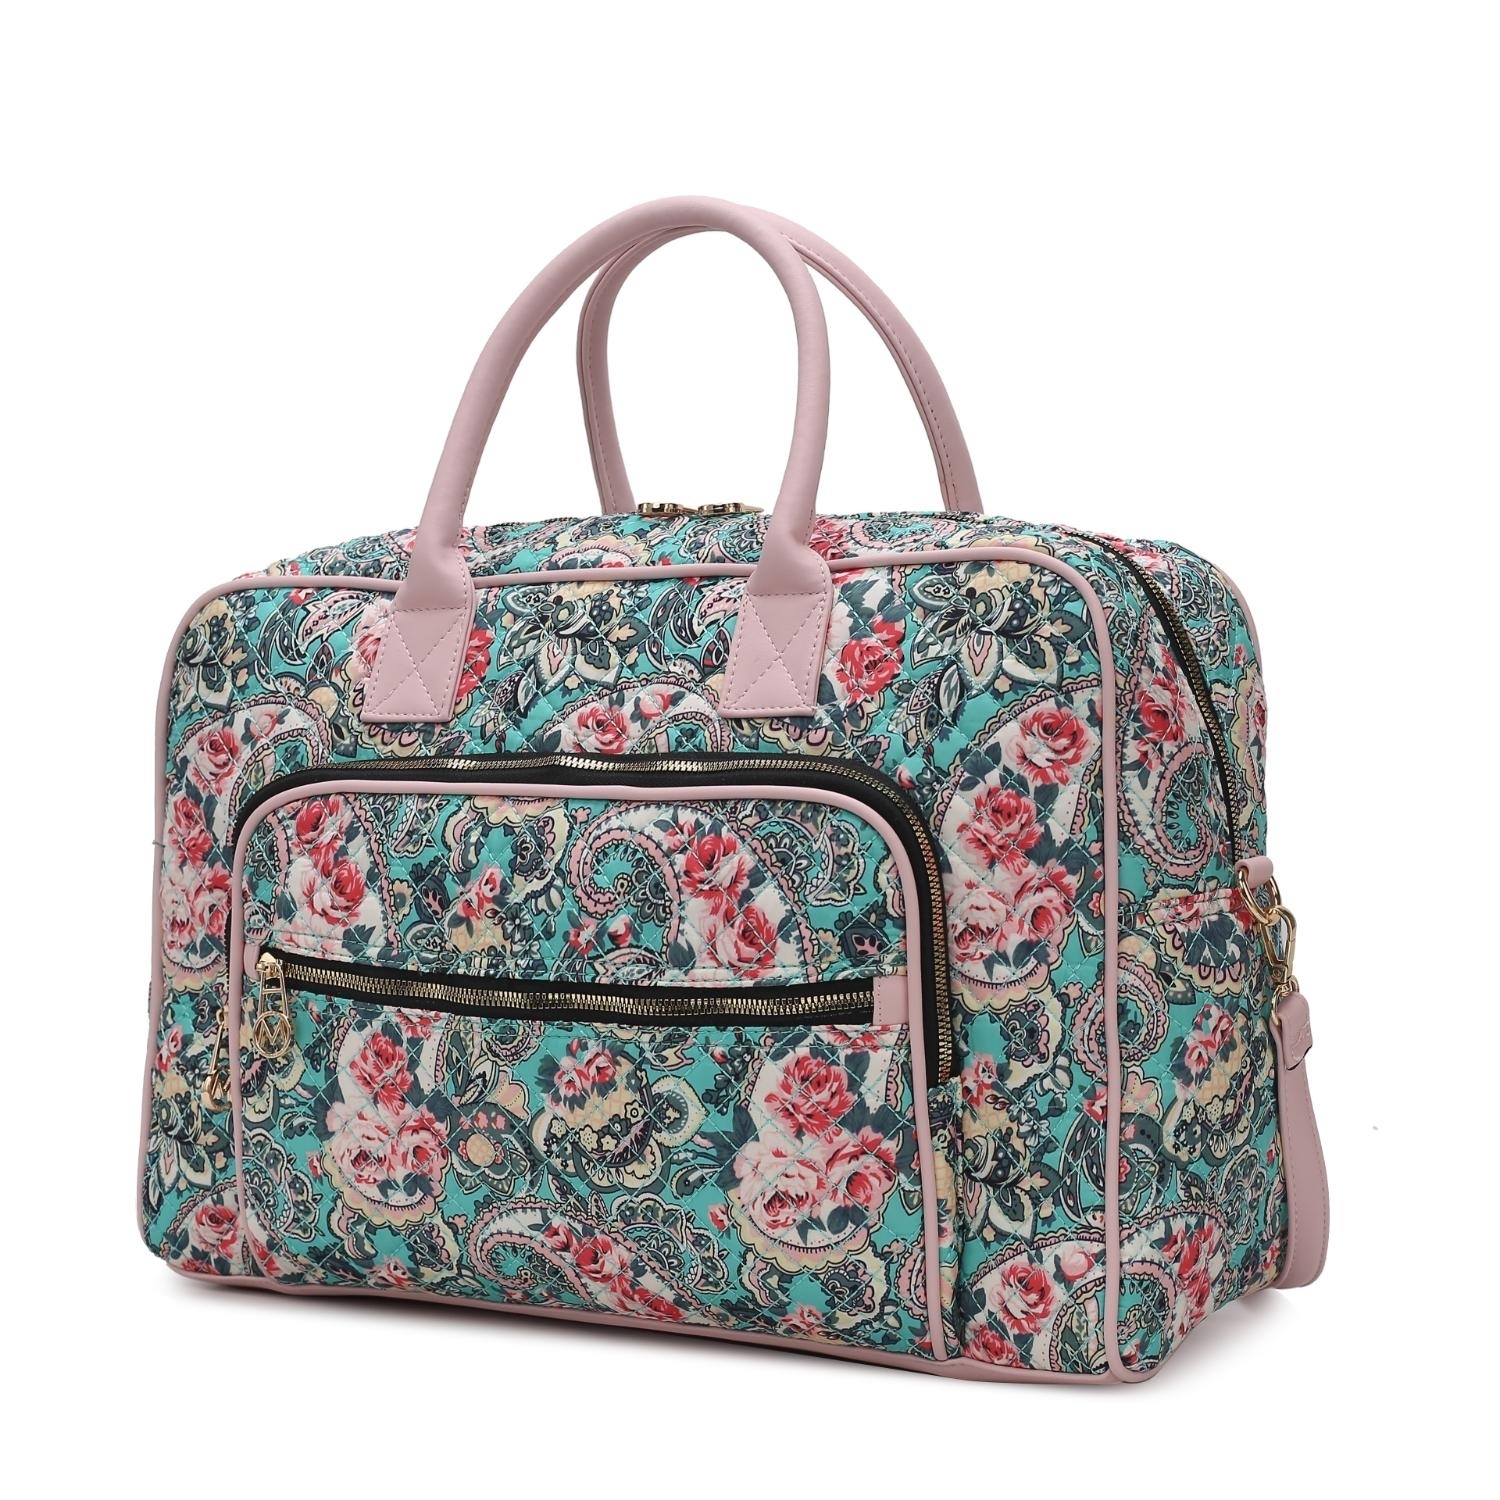 MKF Collection Jayla Quilted Cotton Botanical Pattern Women's Duffle Bag By Mia K - Green